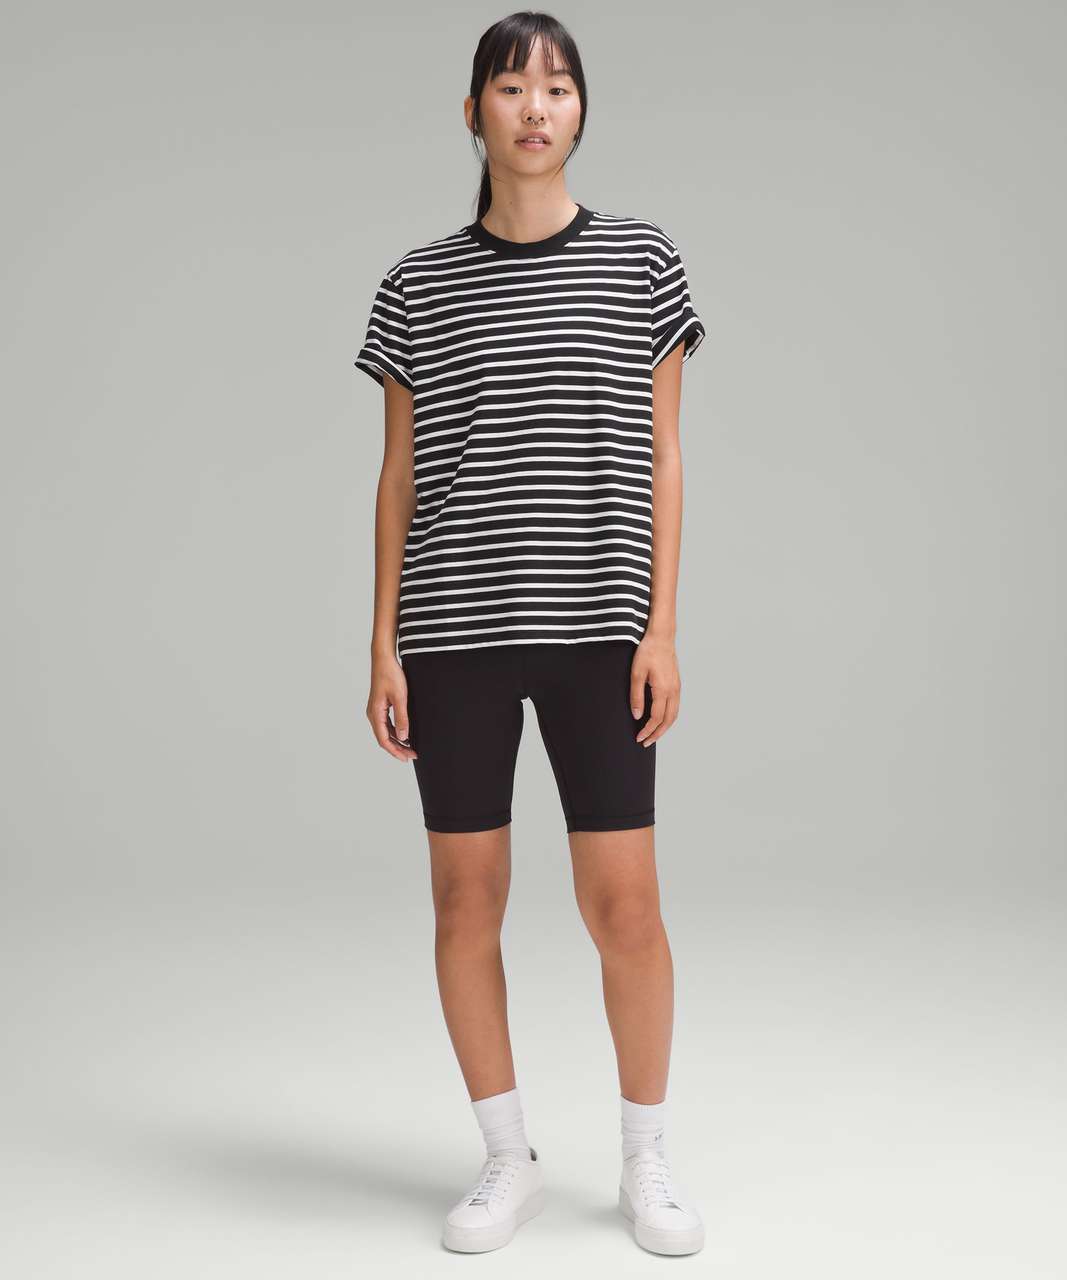 Lululemon All Yours Cotton T-Shirt - Yachtie Stripe Black White